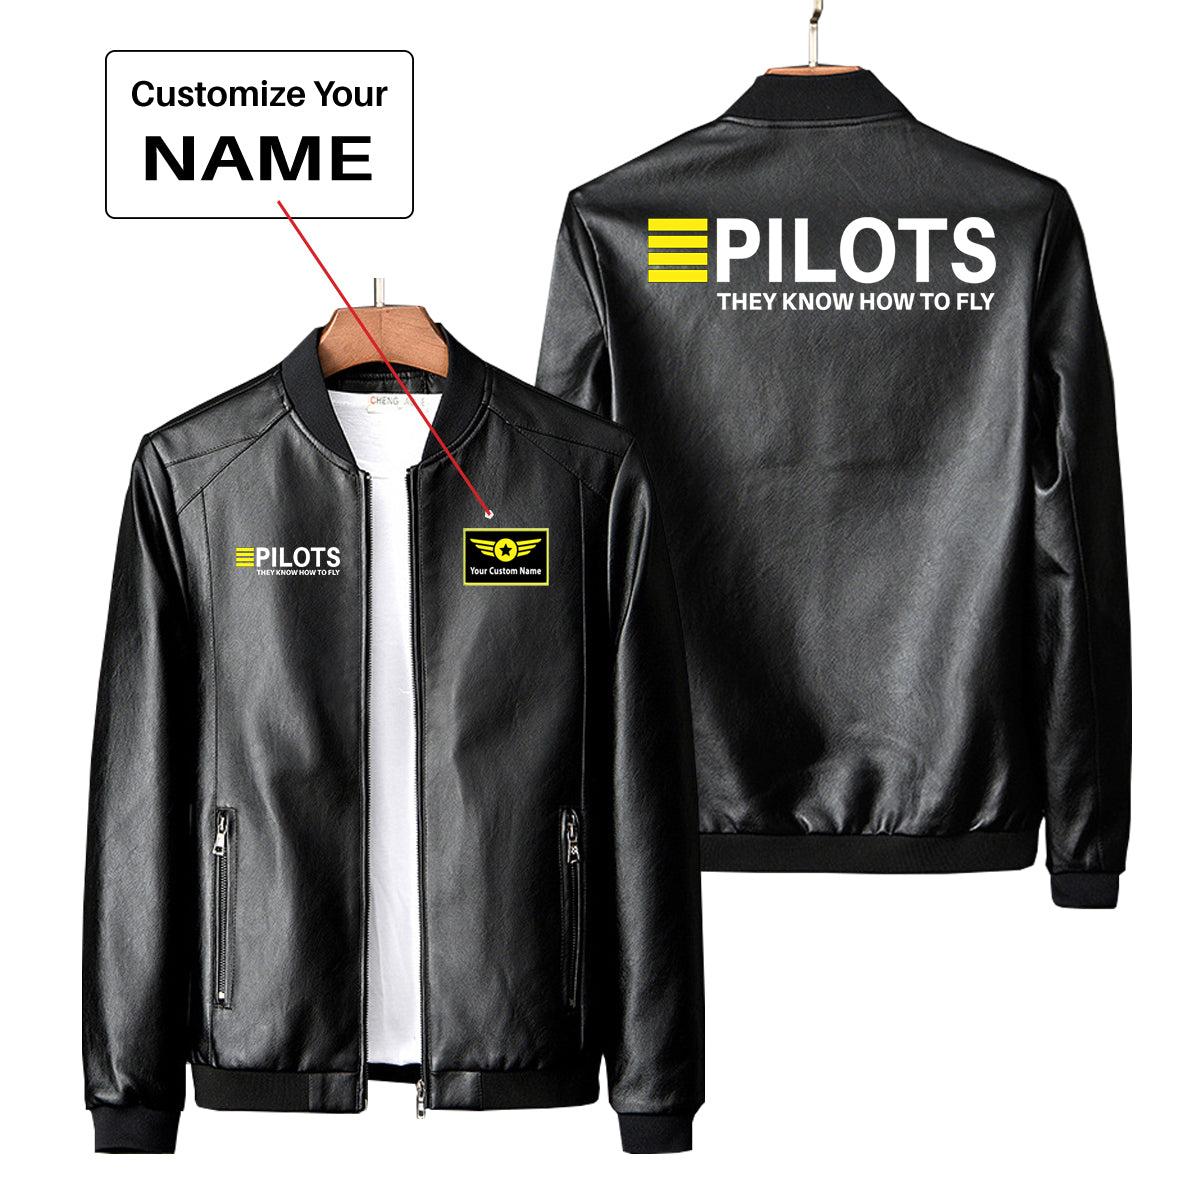 Pilots They Know How To Fly Designed PU Leather Jackets